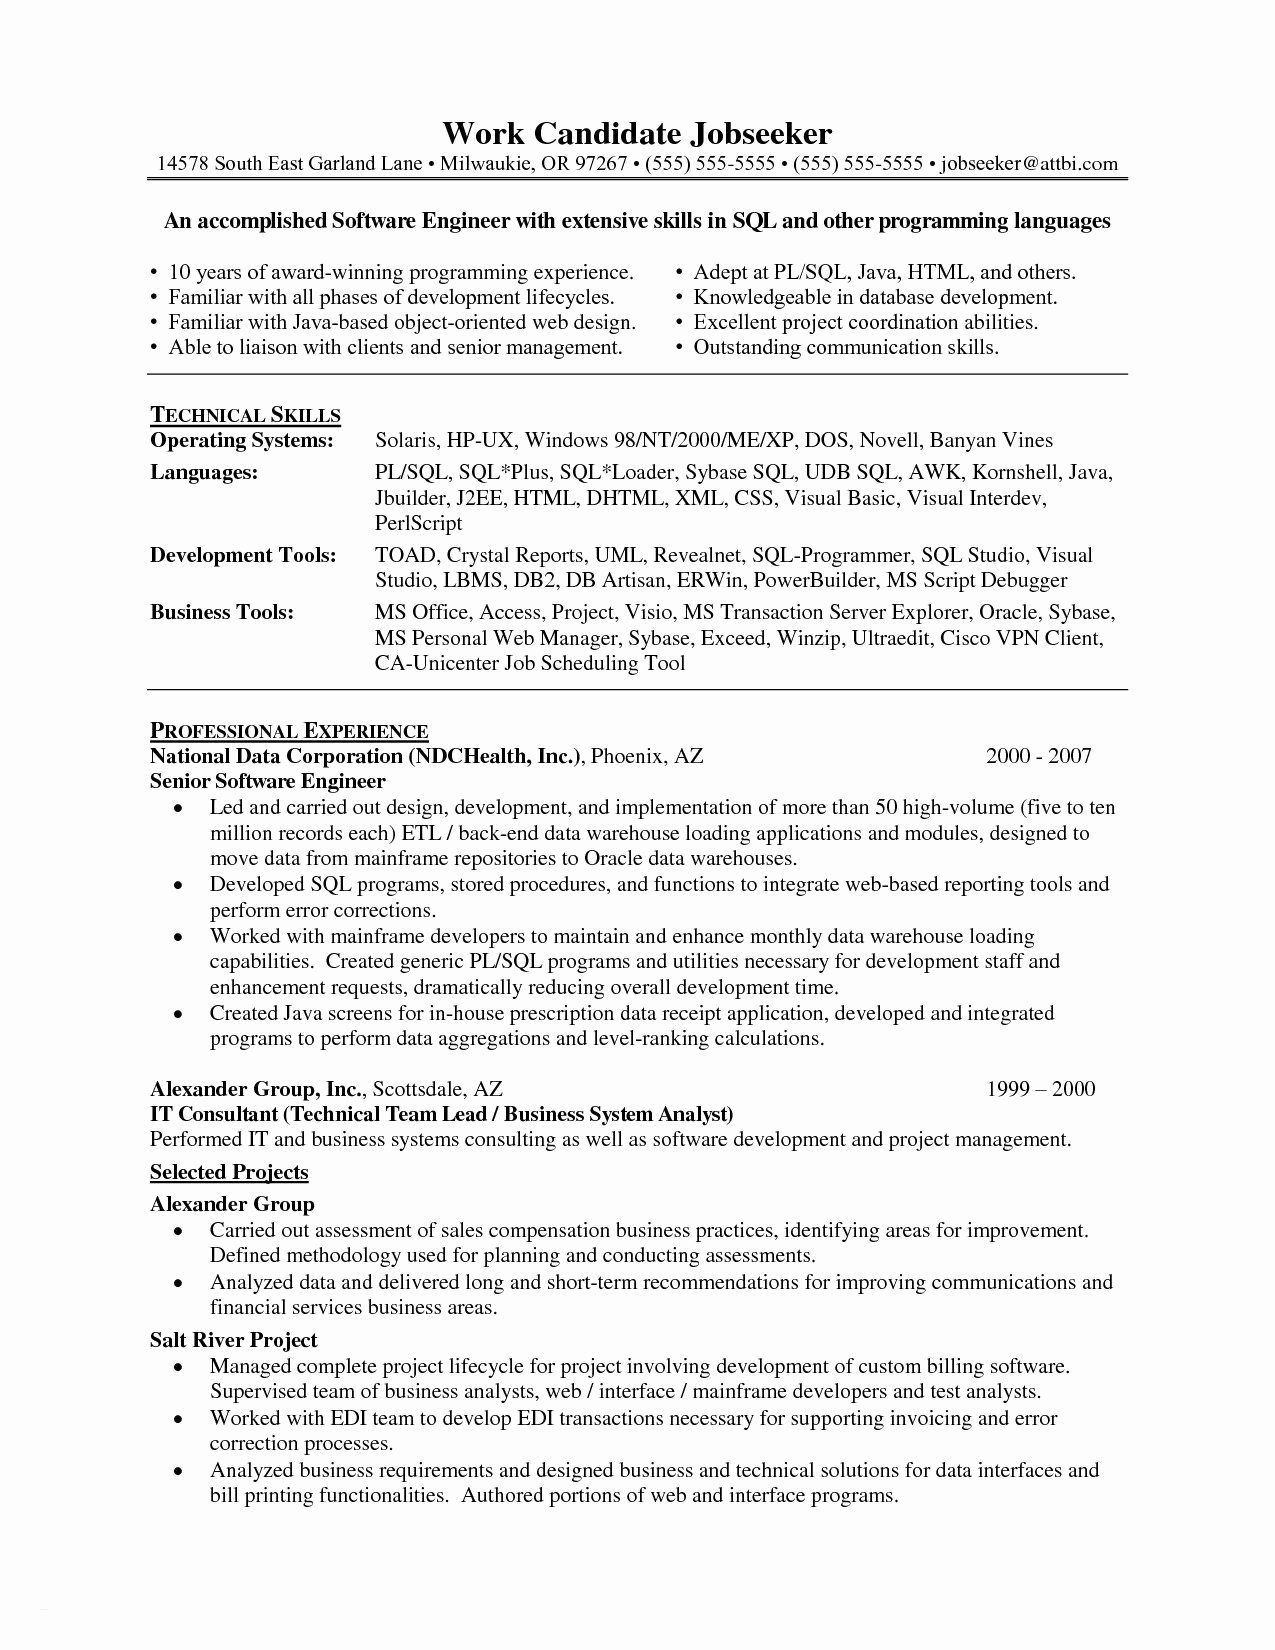 Sample Resume for Experienced software Engineer List